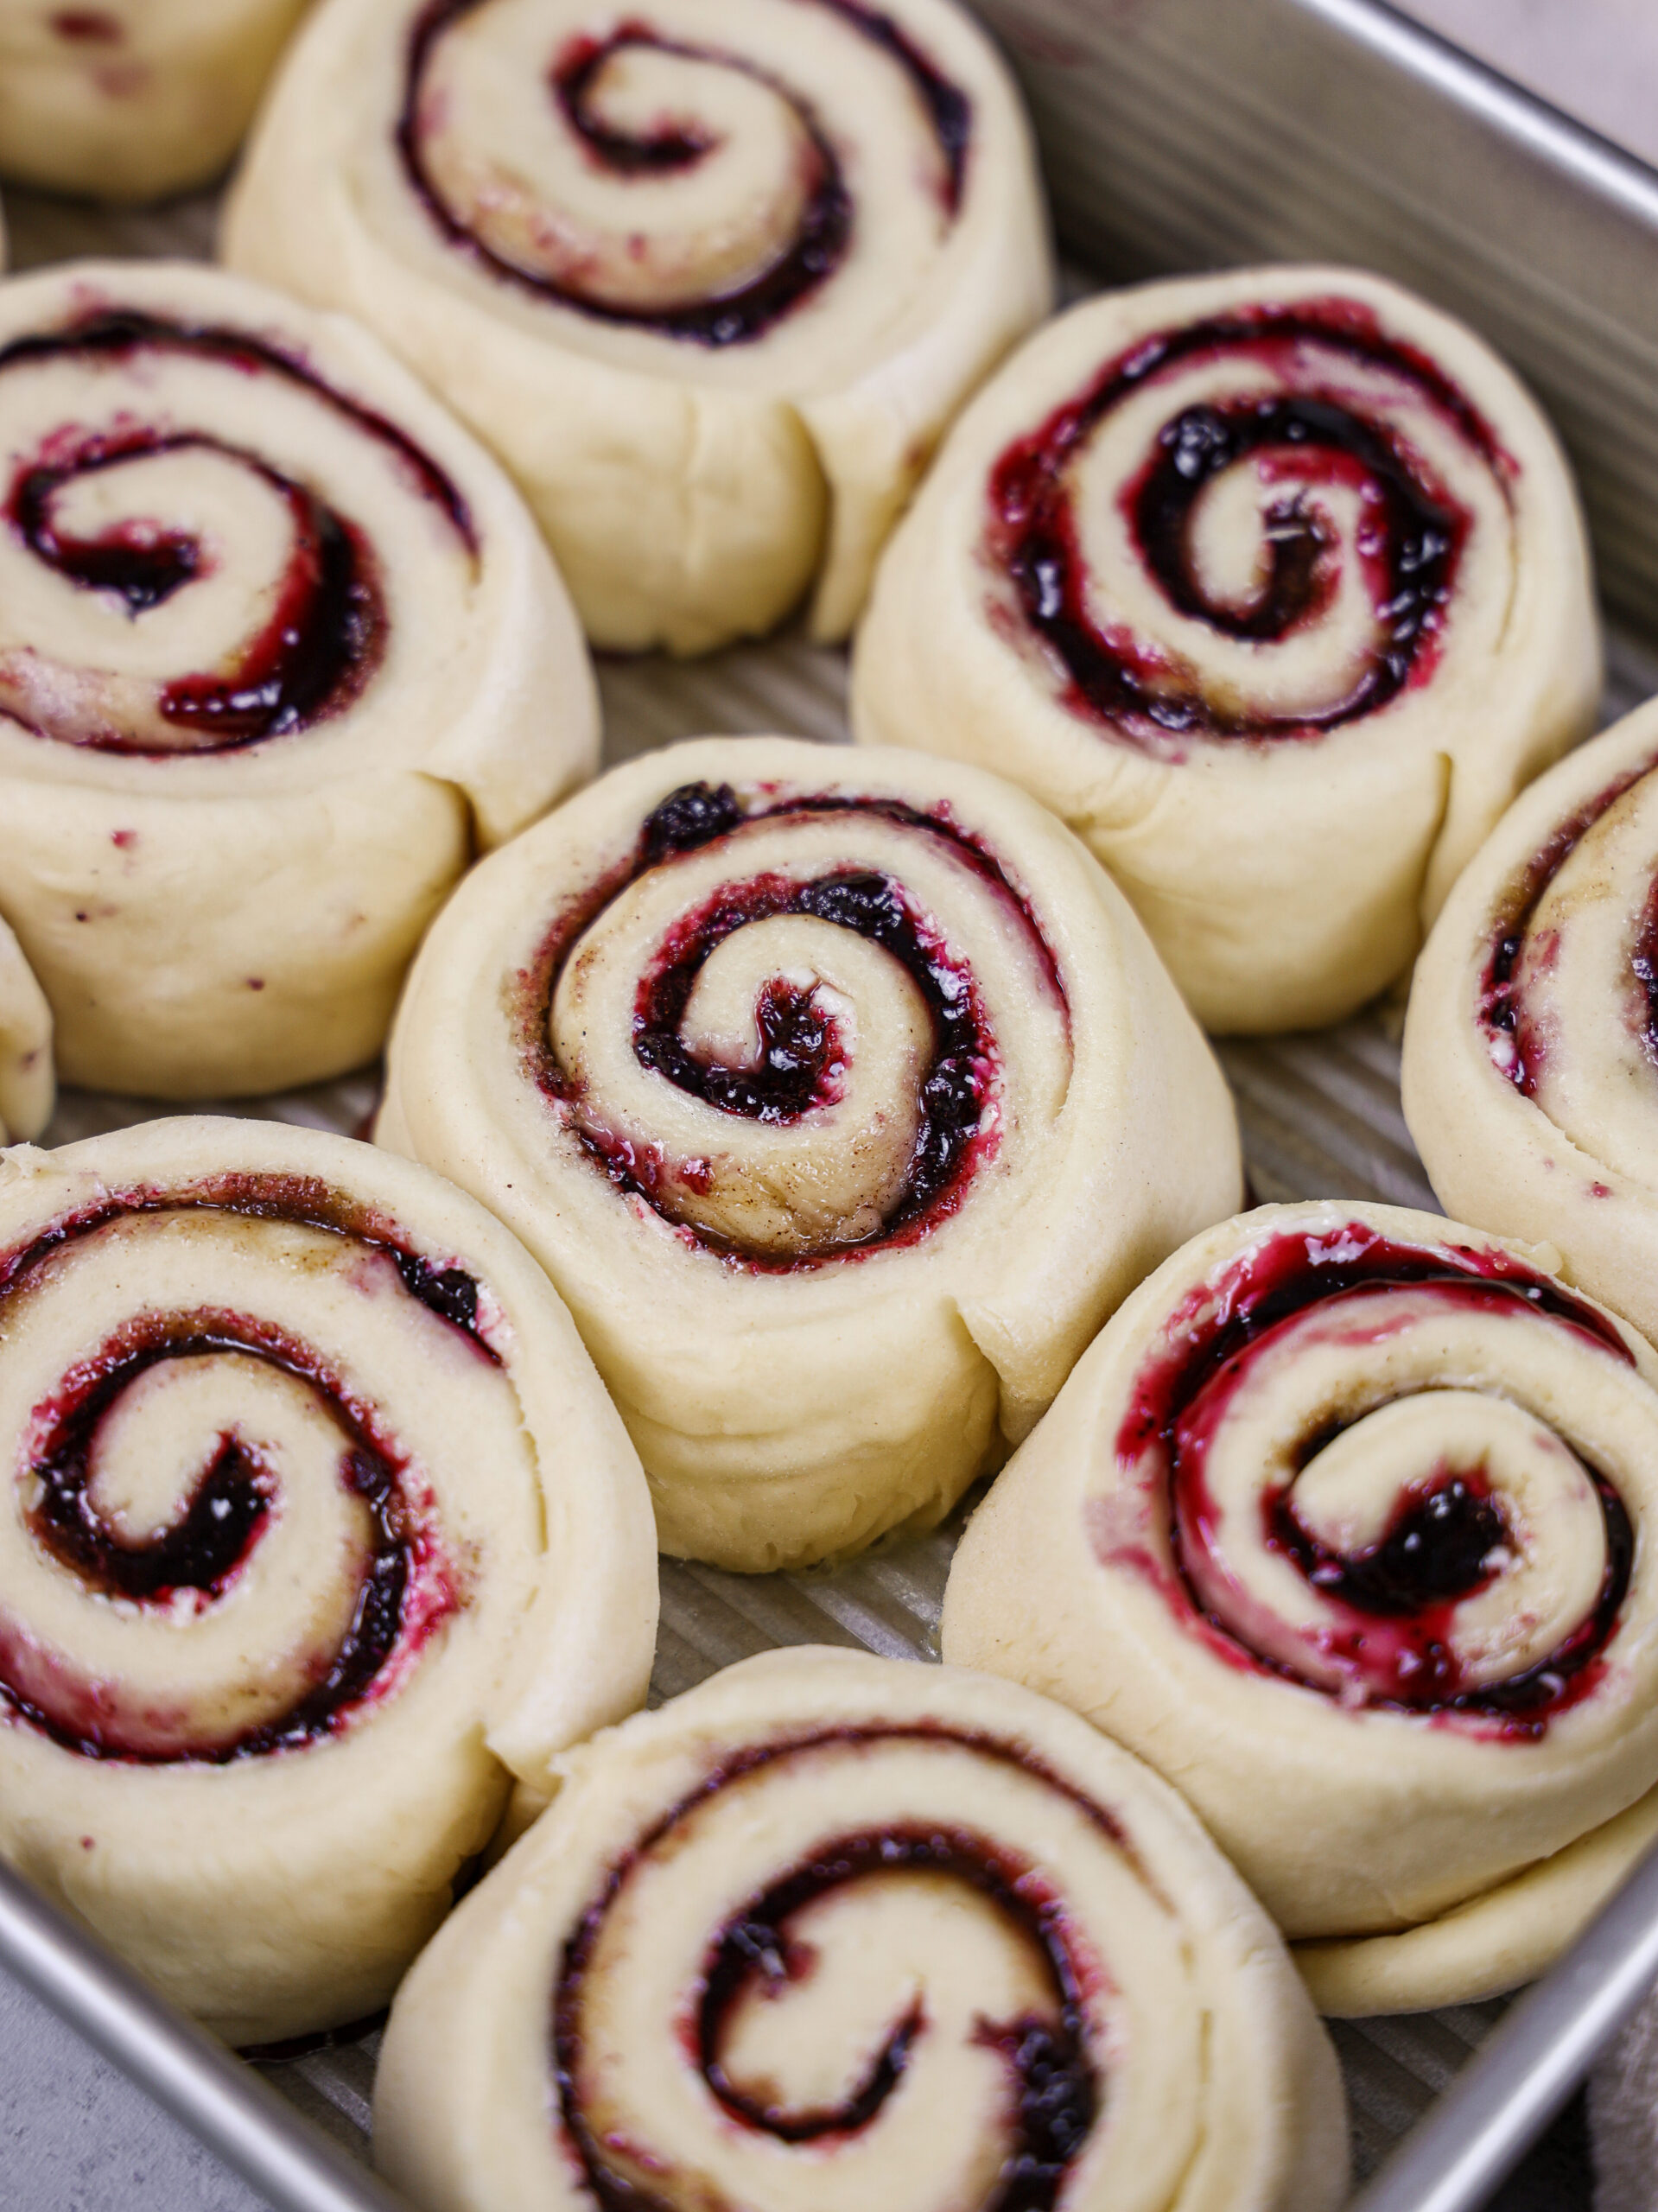 image of blueberry cinnamon rolls that have been cut and proofed, and are ready to be baked